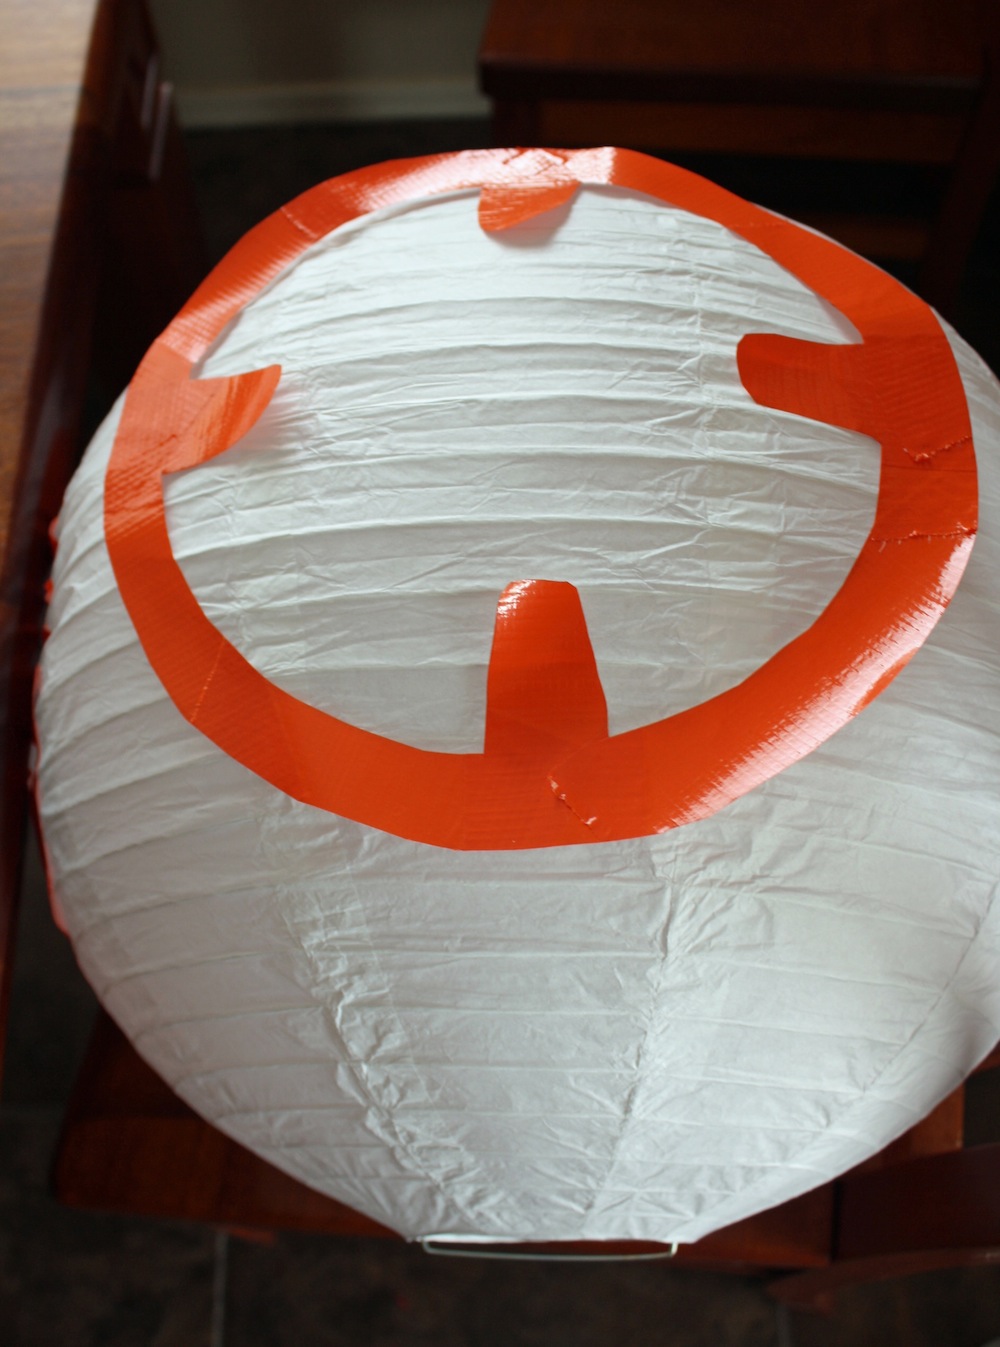 Place Duct tape on BB-8 Paper Lantern